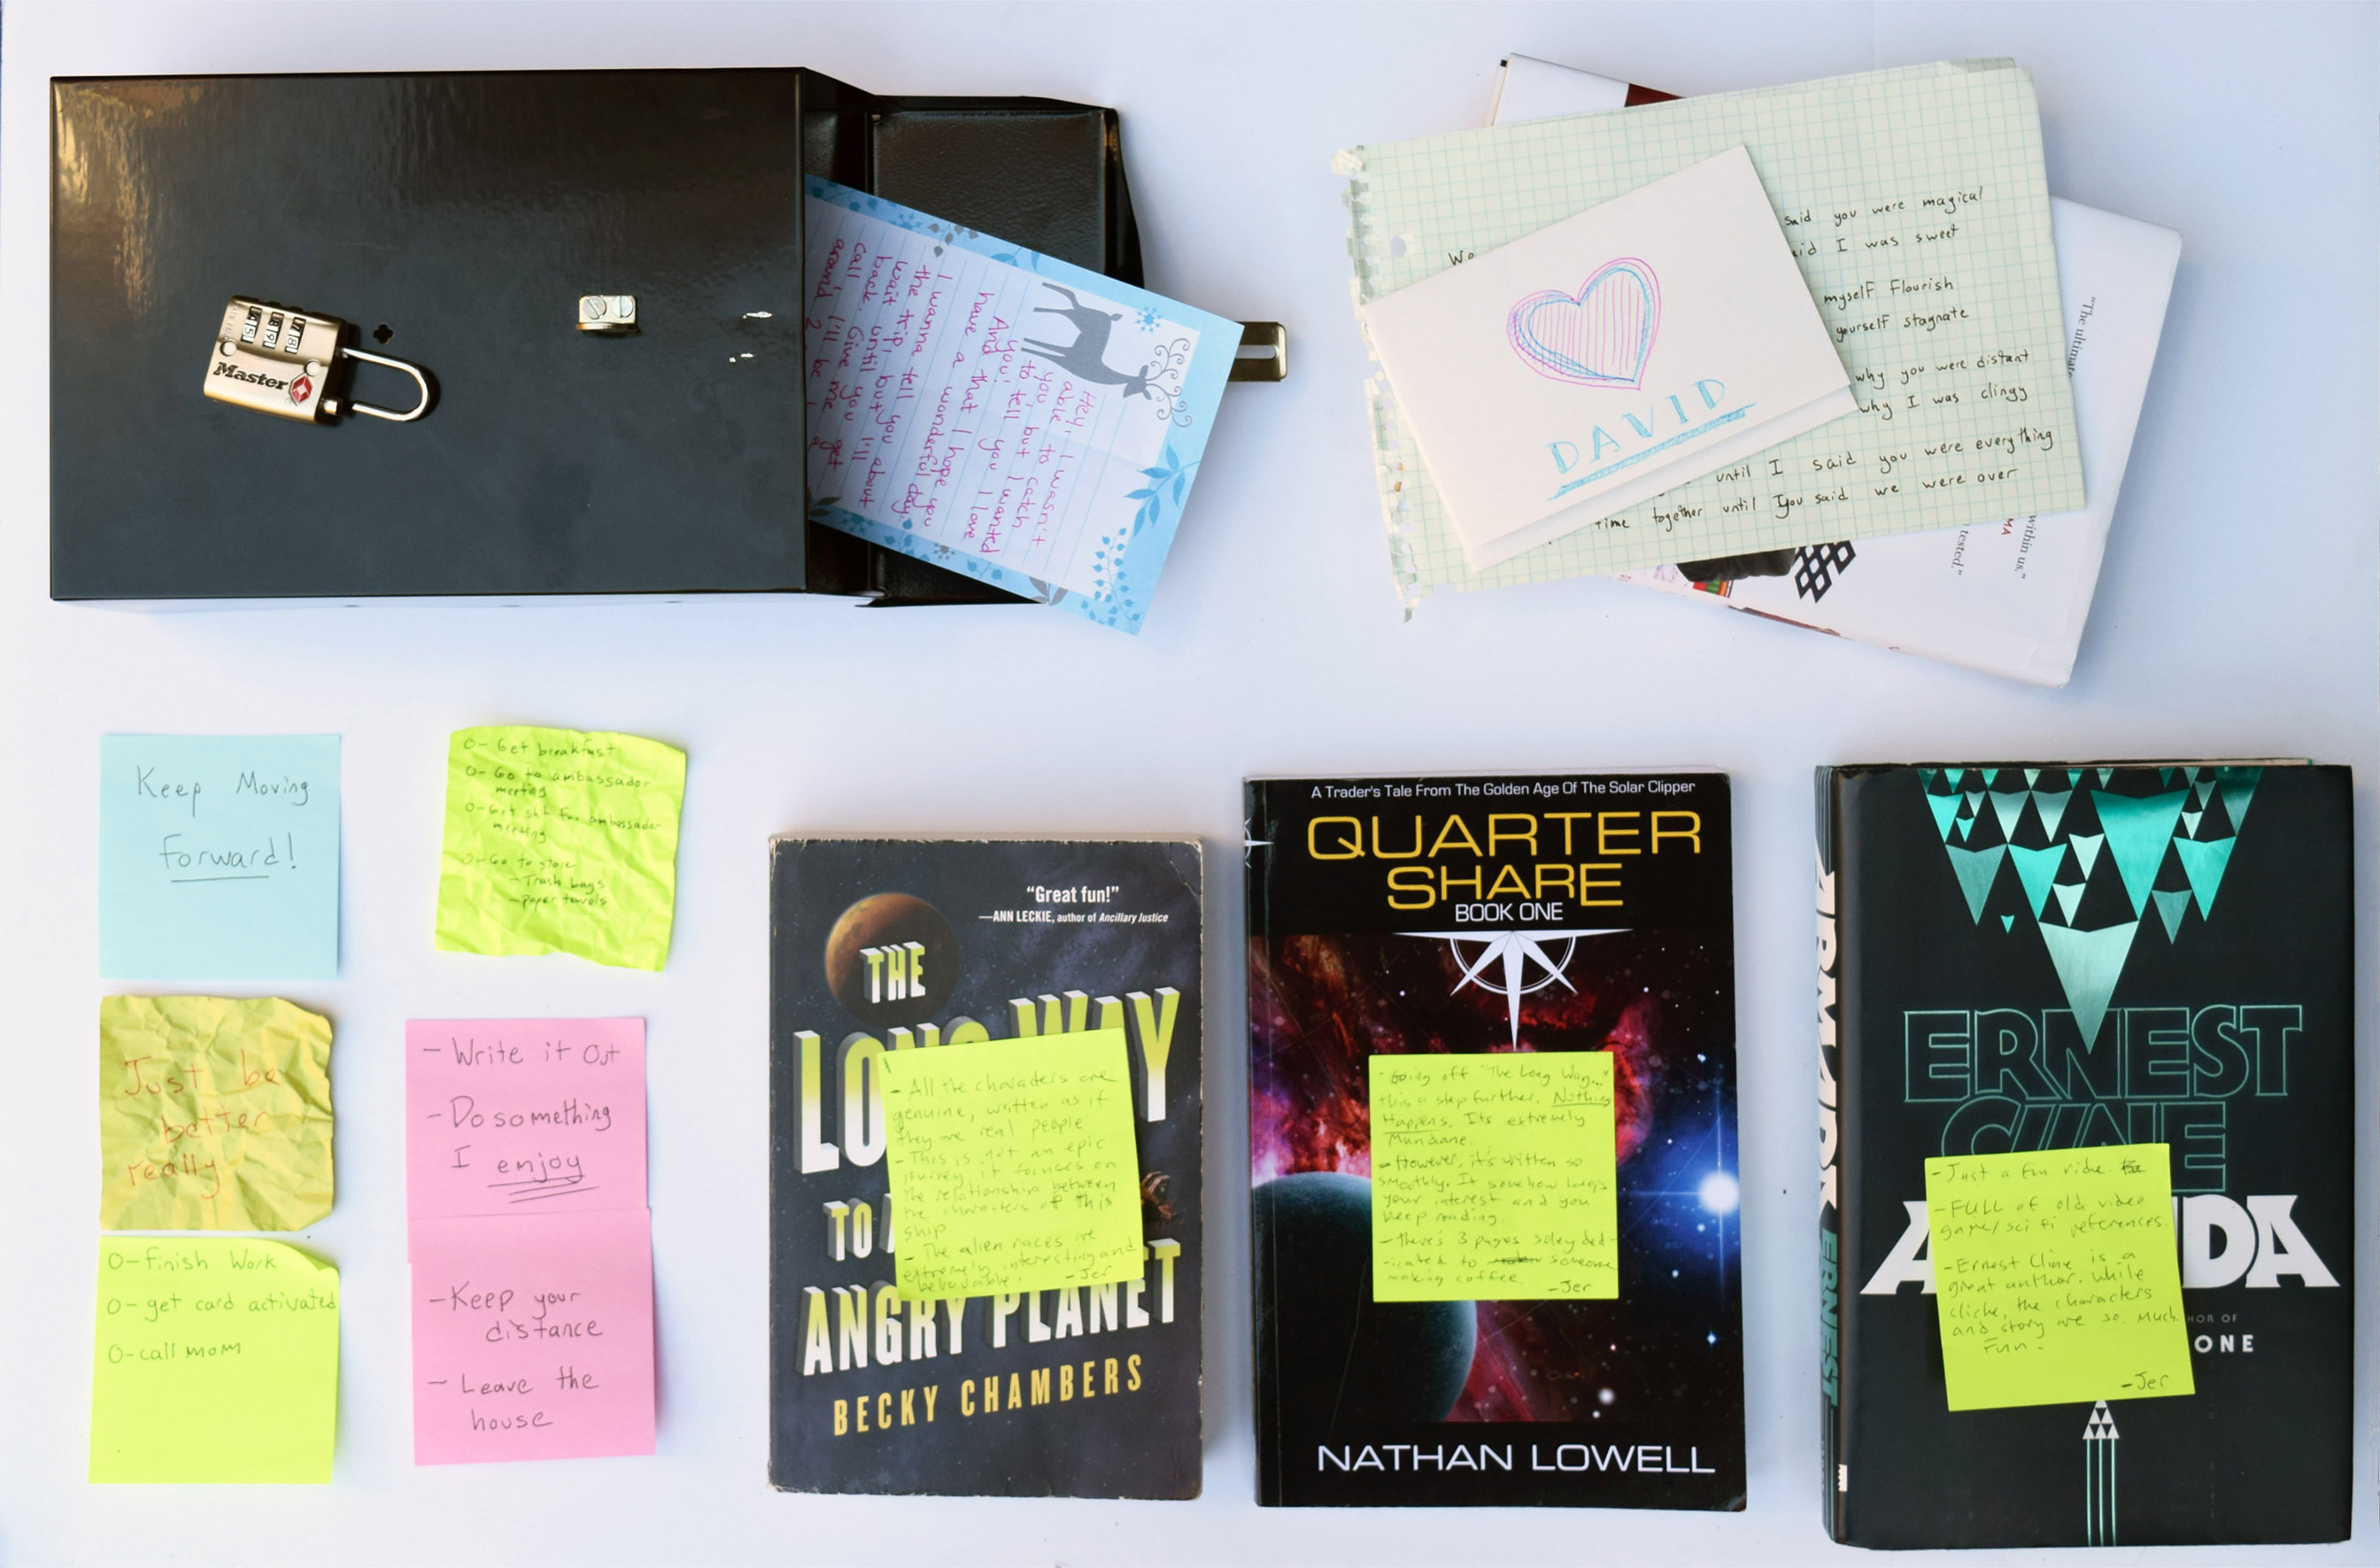 View full size version of laid-out books, post-its, letters and lock box